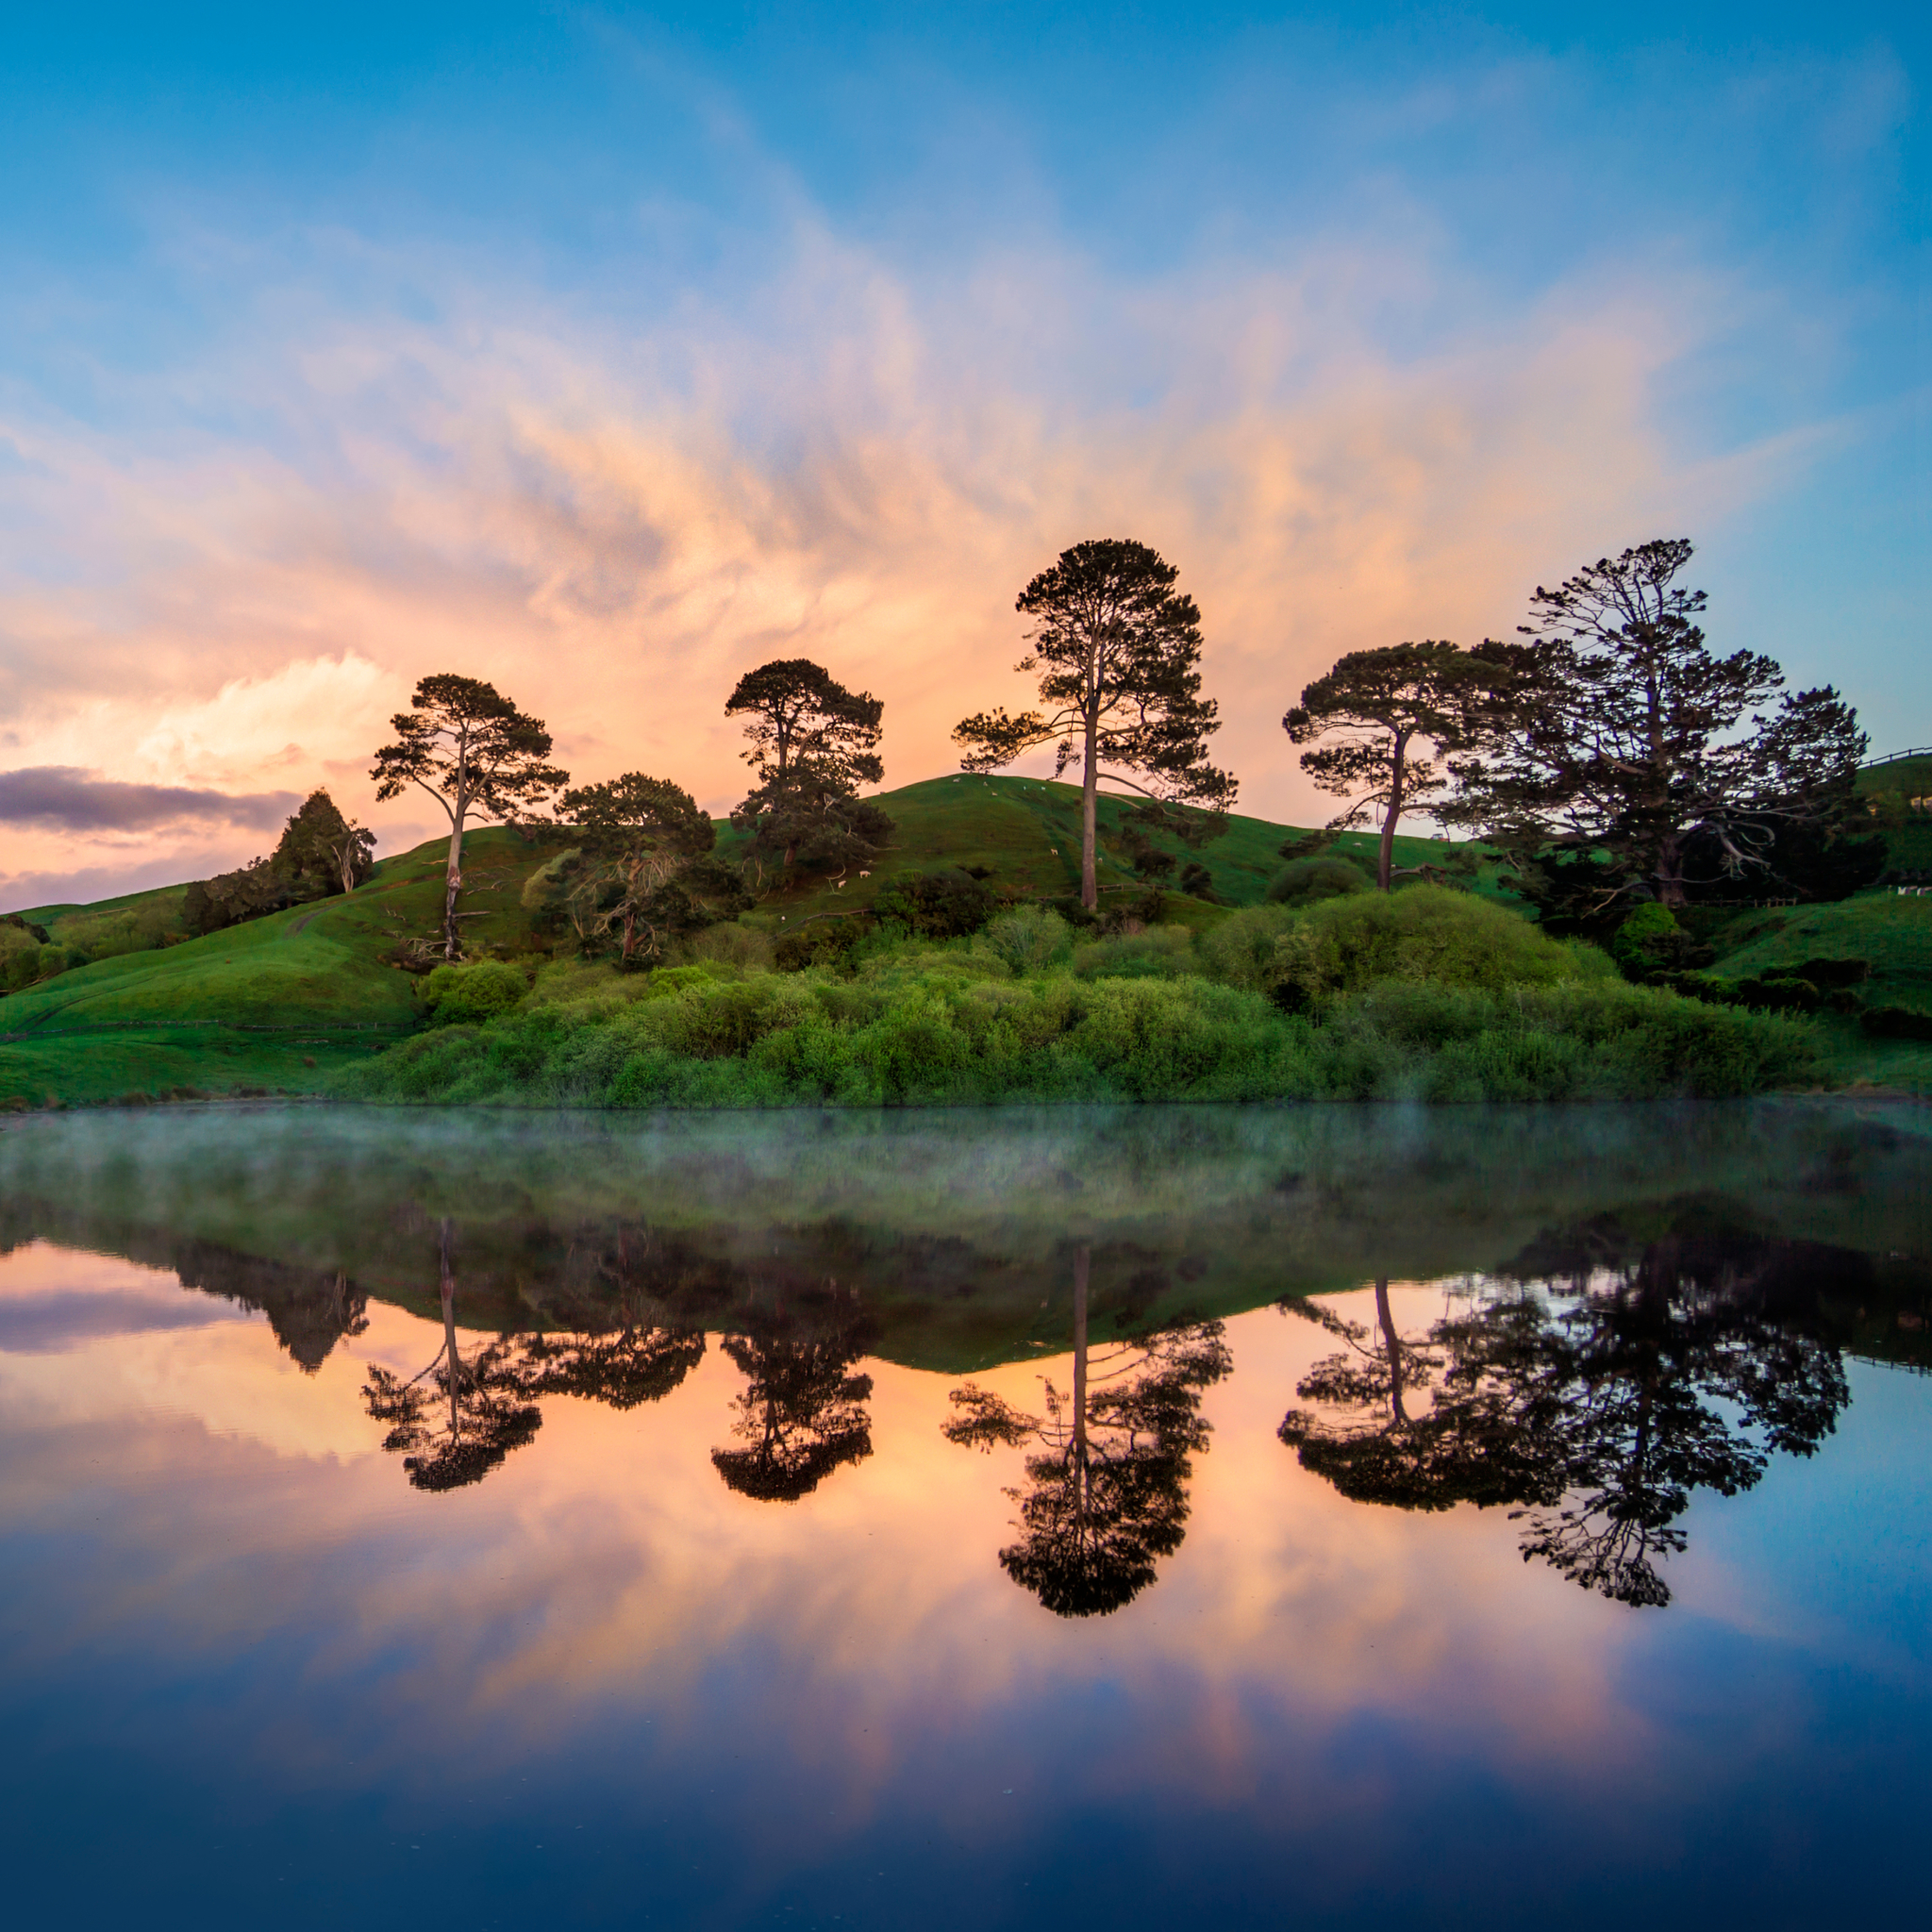 Hobbiton in the Morning by Trey Ratcliff